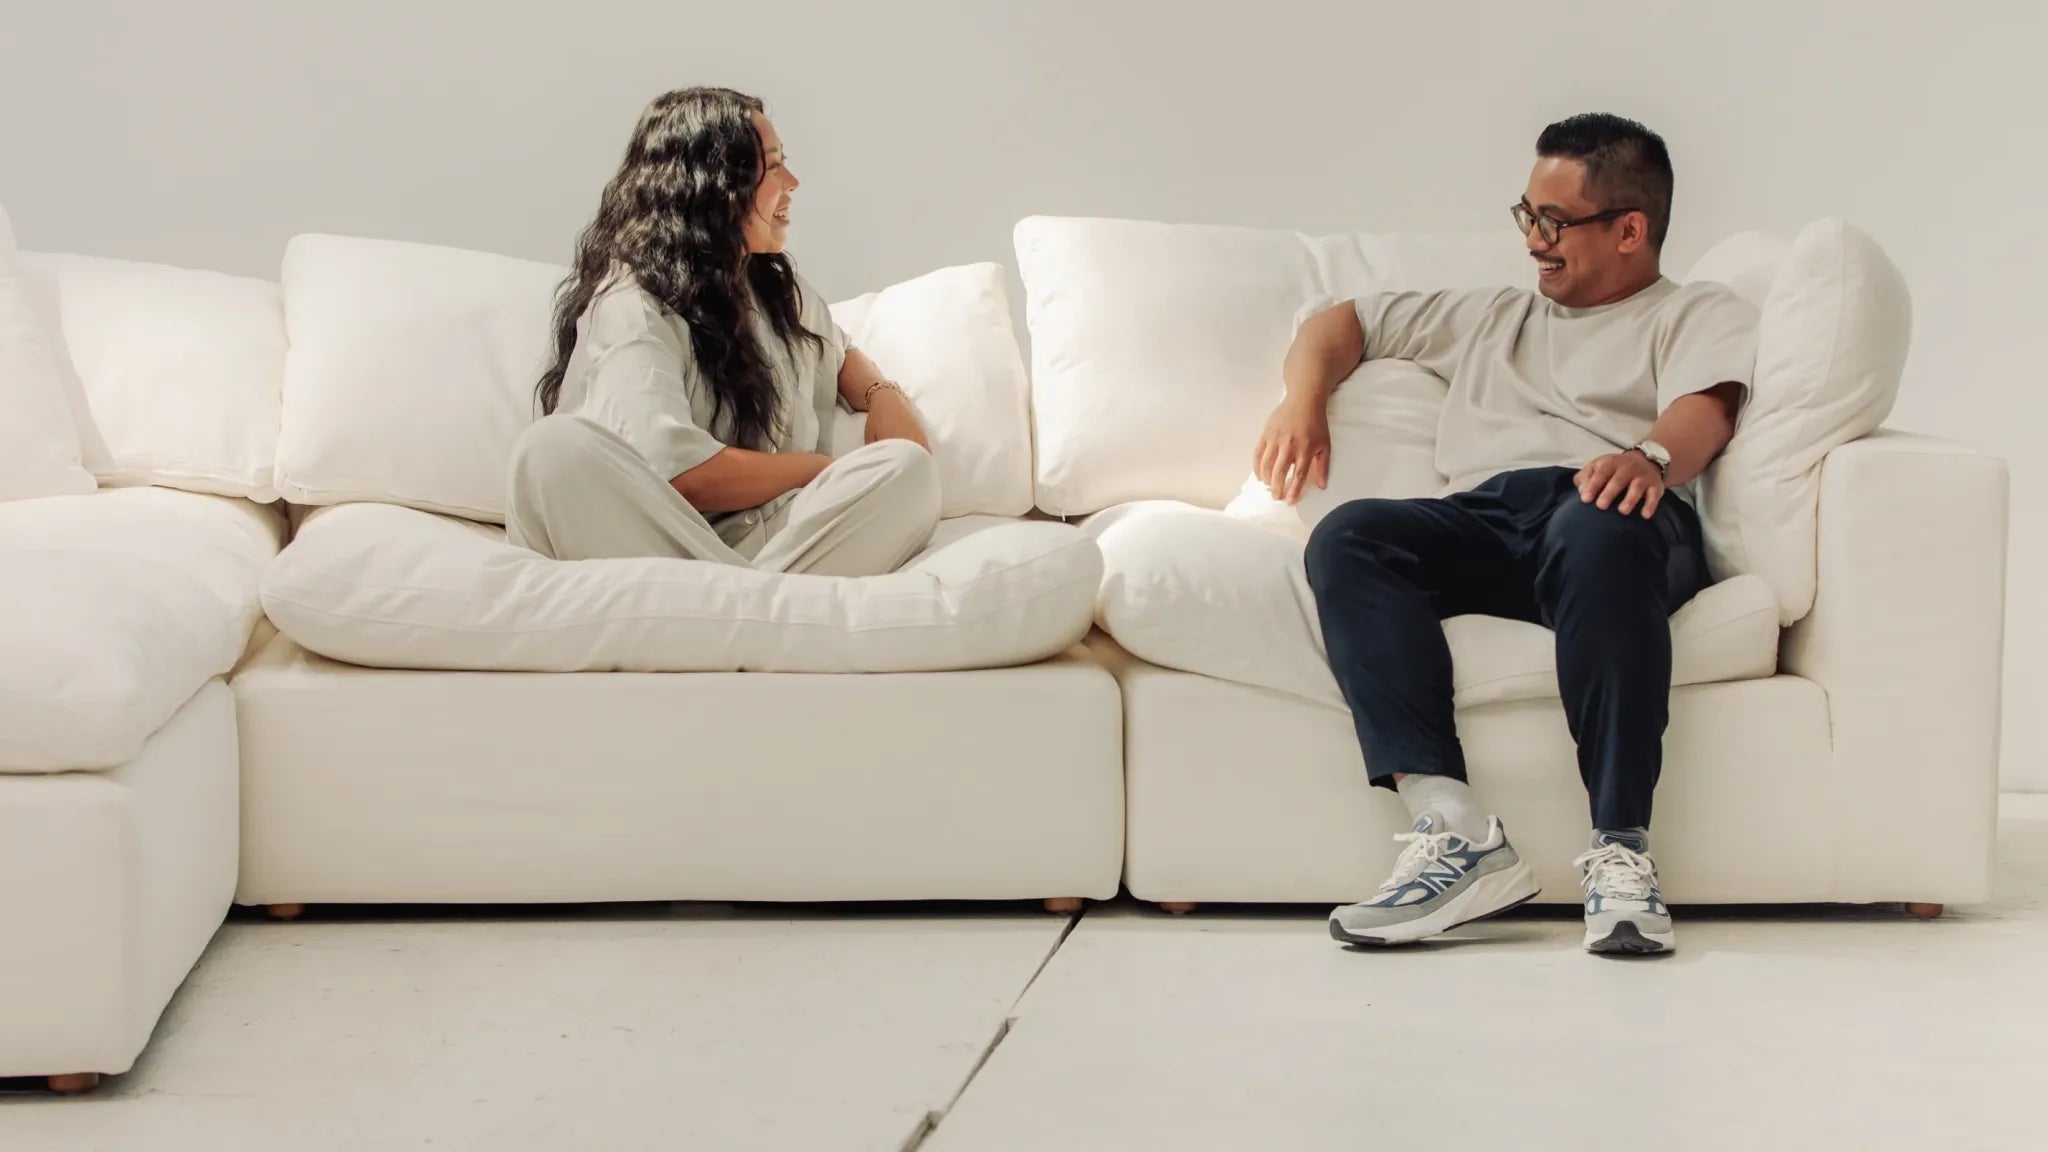 A woman and a man are sitting on a white sectional sofa. Both are smiling and engaged in conversation. They are dressed in casual, light-colored clothing. The background is minimalistic with a white wall and floor, creating a clean and serene atmosphere.